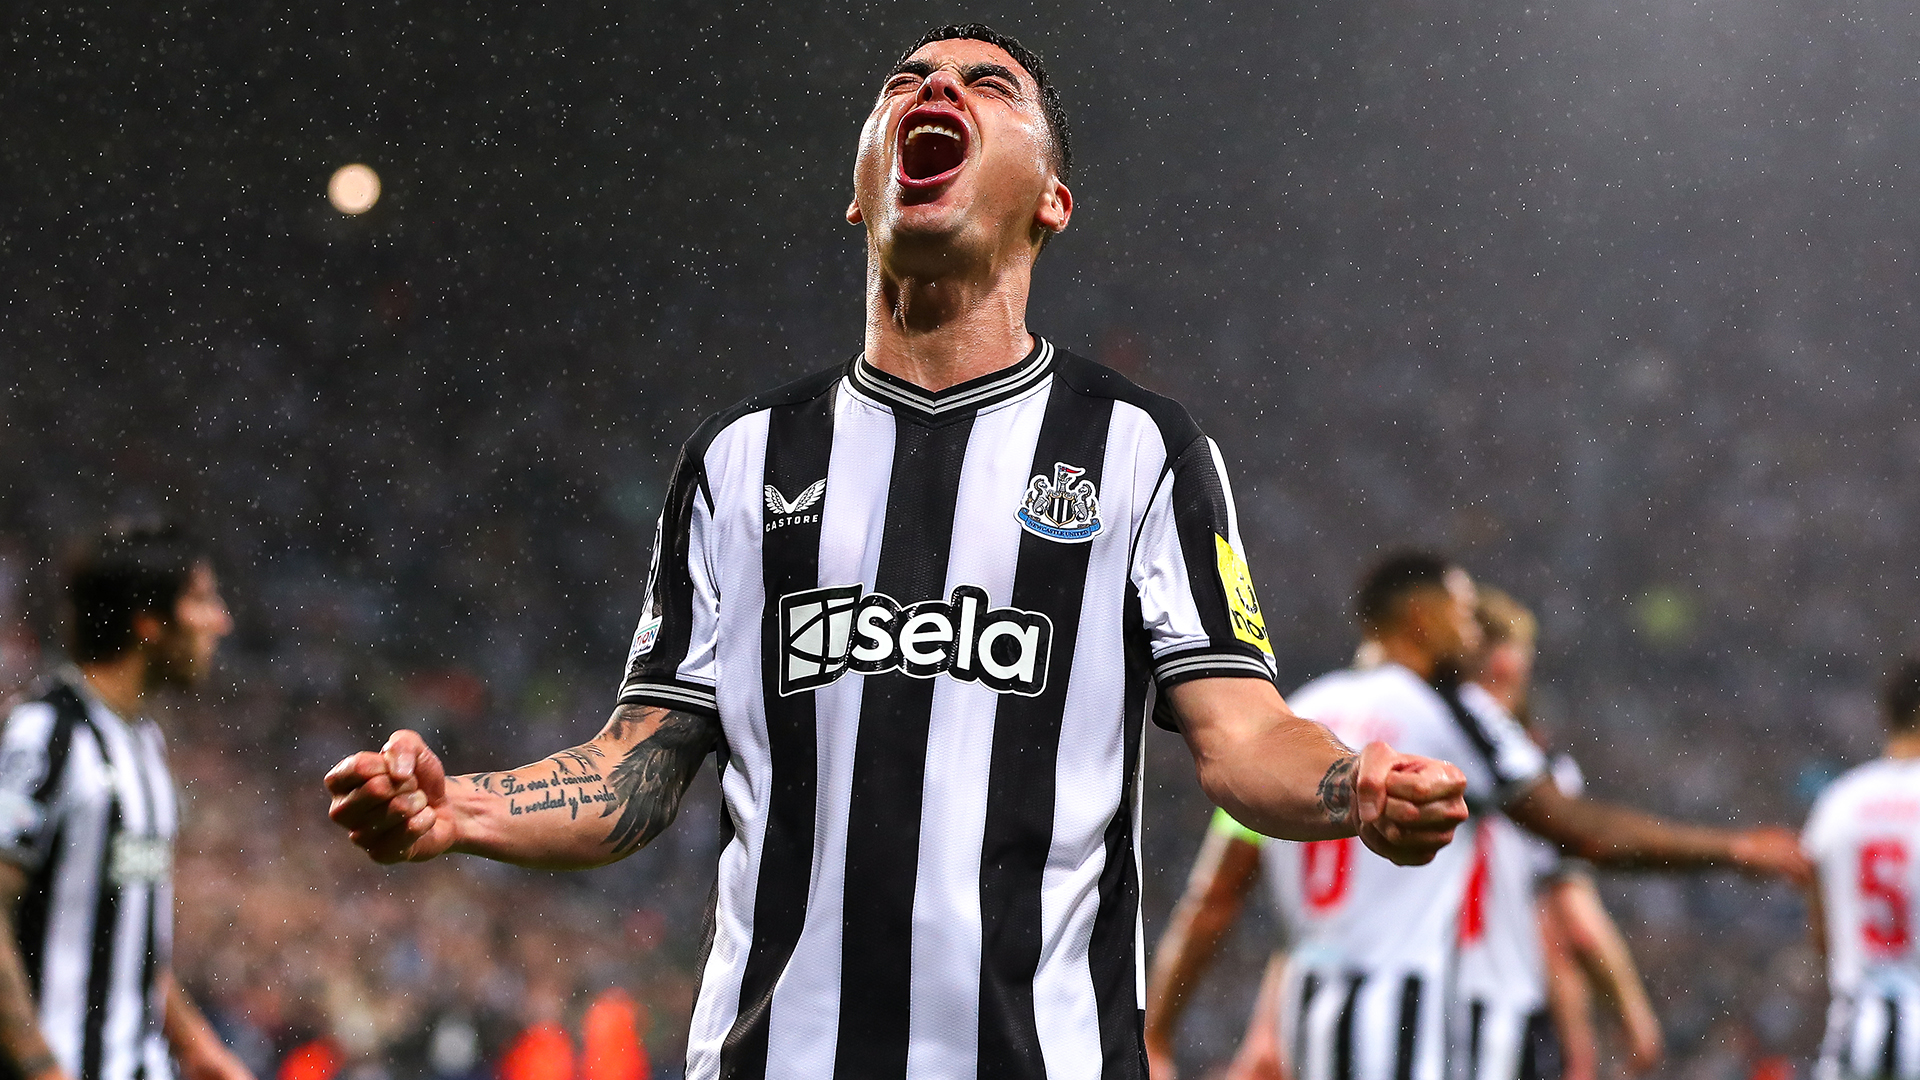 Miguel Almiron of Newcastle United celebrates after scoring his team's first goal during the UEFA Champions League match between Newcastle United FC and Paris Saint-Germain at St. James Park on October 4, 2023 in Newcastle upon Tyne, United Kingdom.